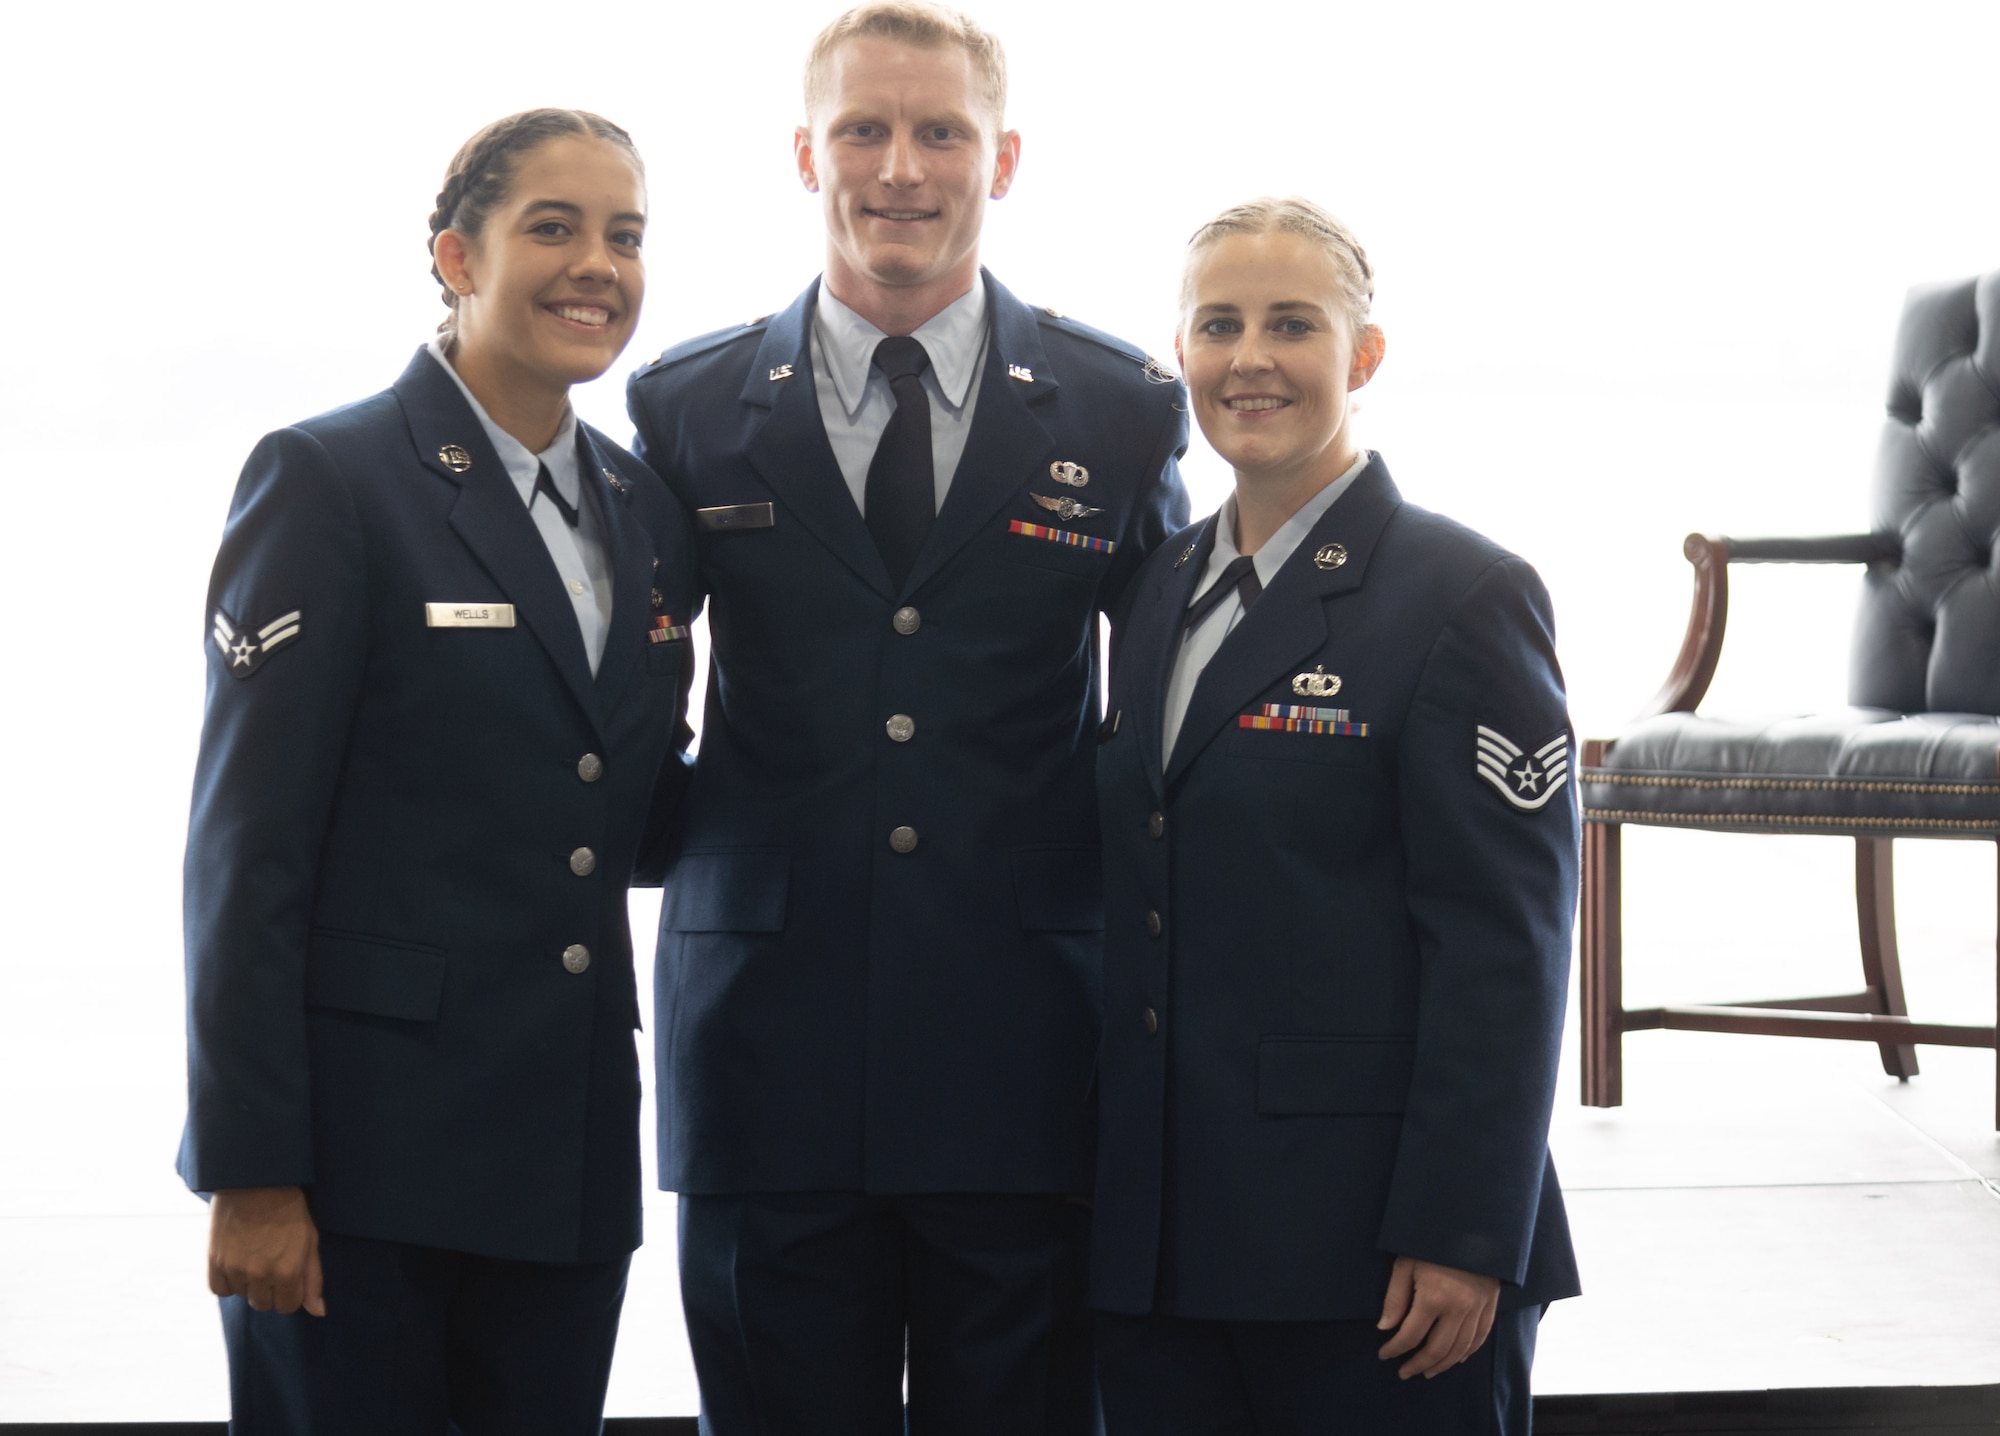 U.S. Air Force Airman 1st Class Trinity Wells, ceremony guidon proffer, 2nd Lt. Jonathan Martell, ceremony narrator, and Staff Sgt. Jacqueline Silva, ceremony guidon proffer, pose for a photo after the 5th Combat Weather Group Activation Ceremony at Fort Bragg, NC, May 5, 2022. The 5th Combat Weather Group is the first combat weather group in DoD history. (Courtesy photo)